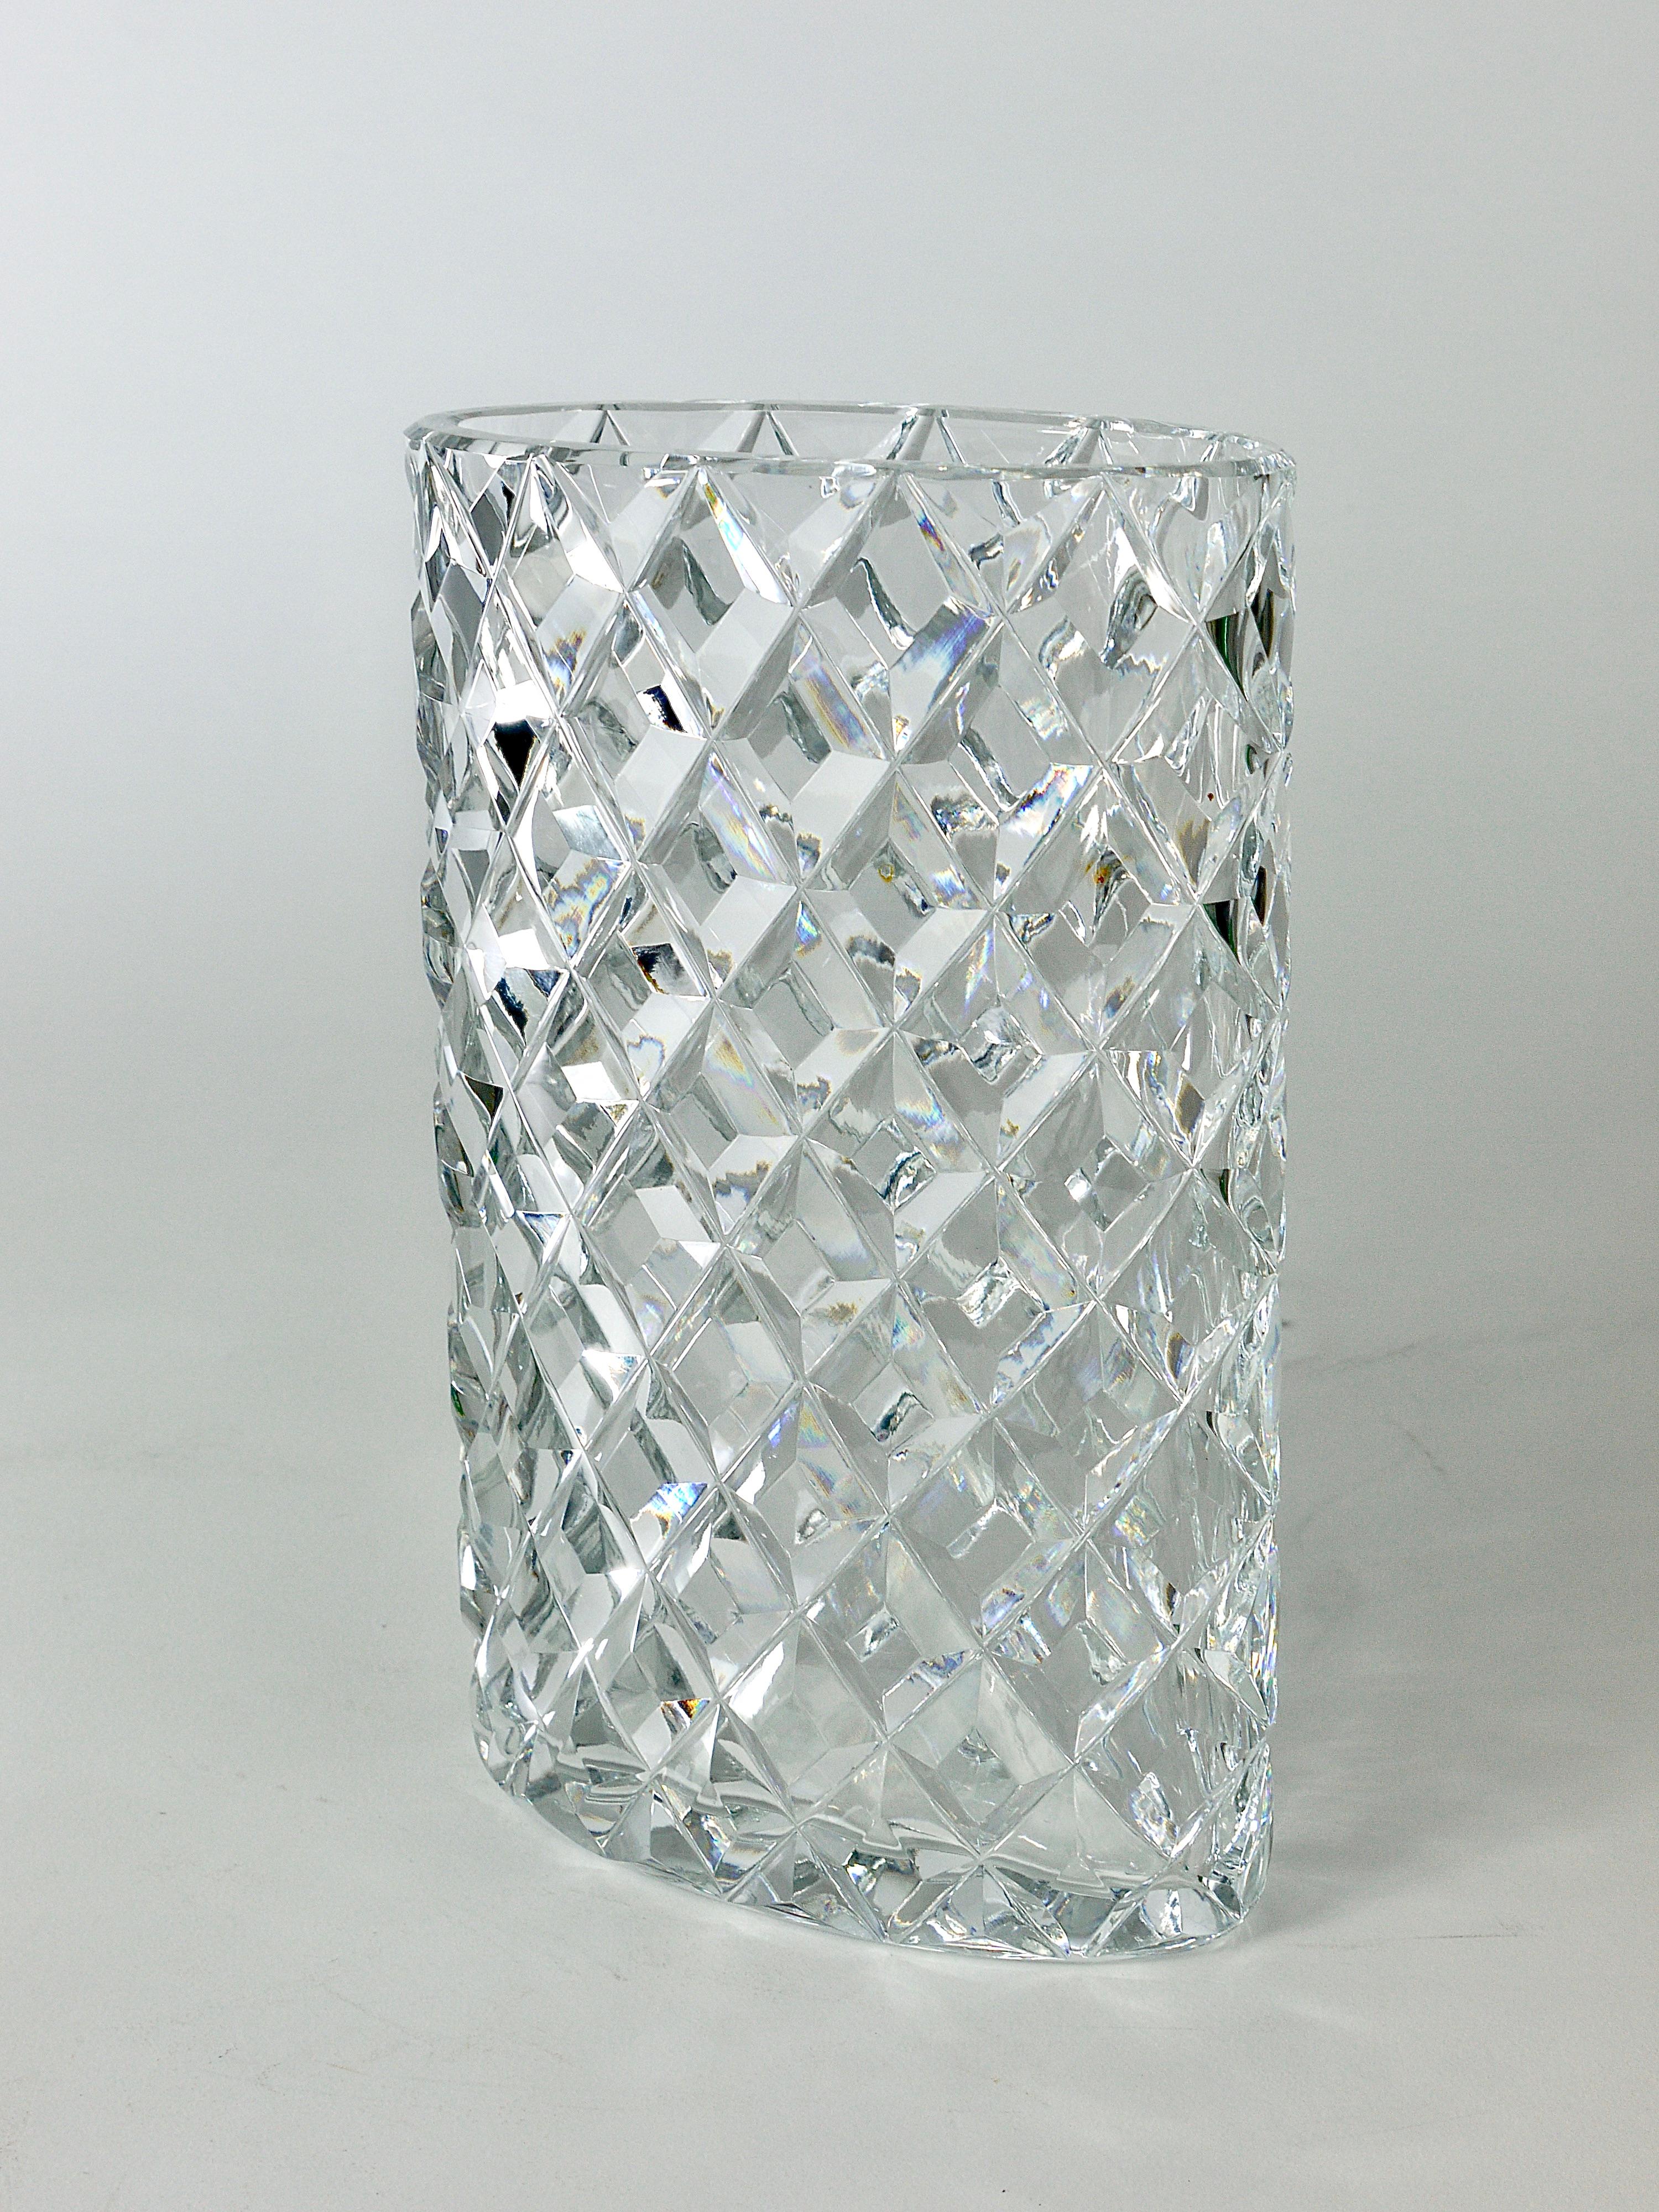 Sparkling Facetted Crystal Glass Vase by Claus Josef Riedel, Austria, 1970s For Sale 5